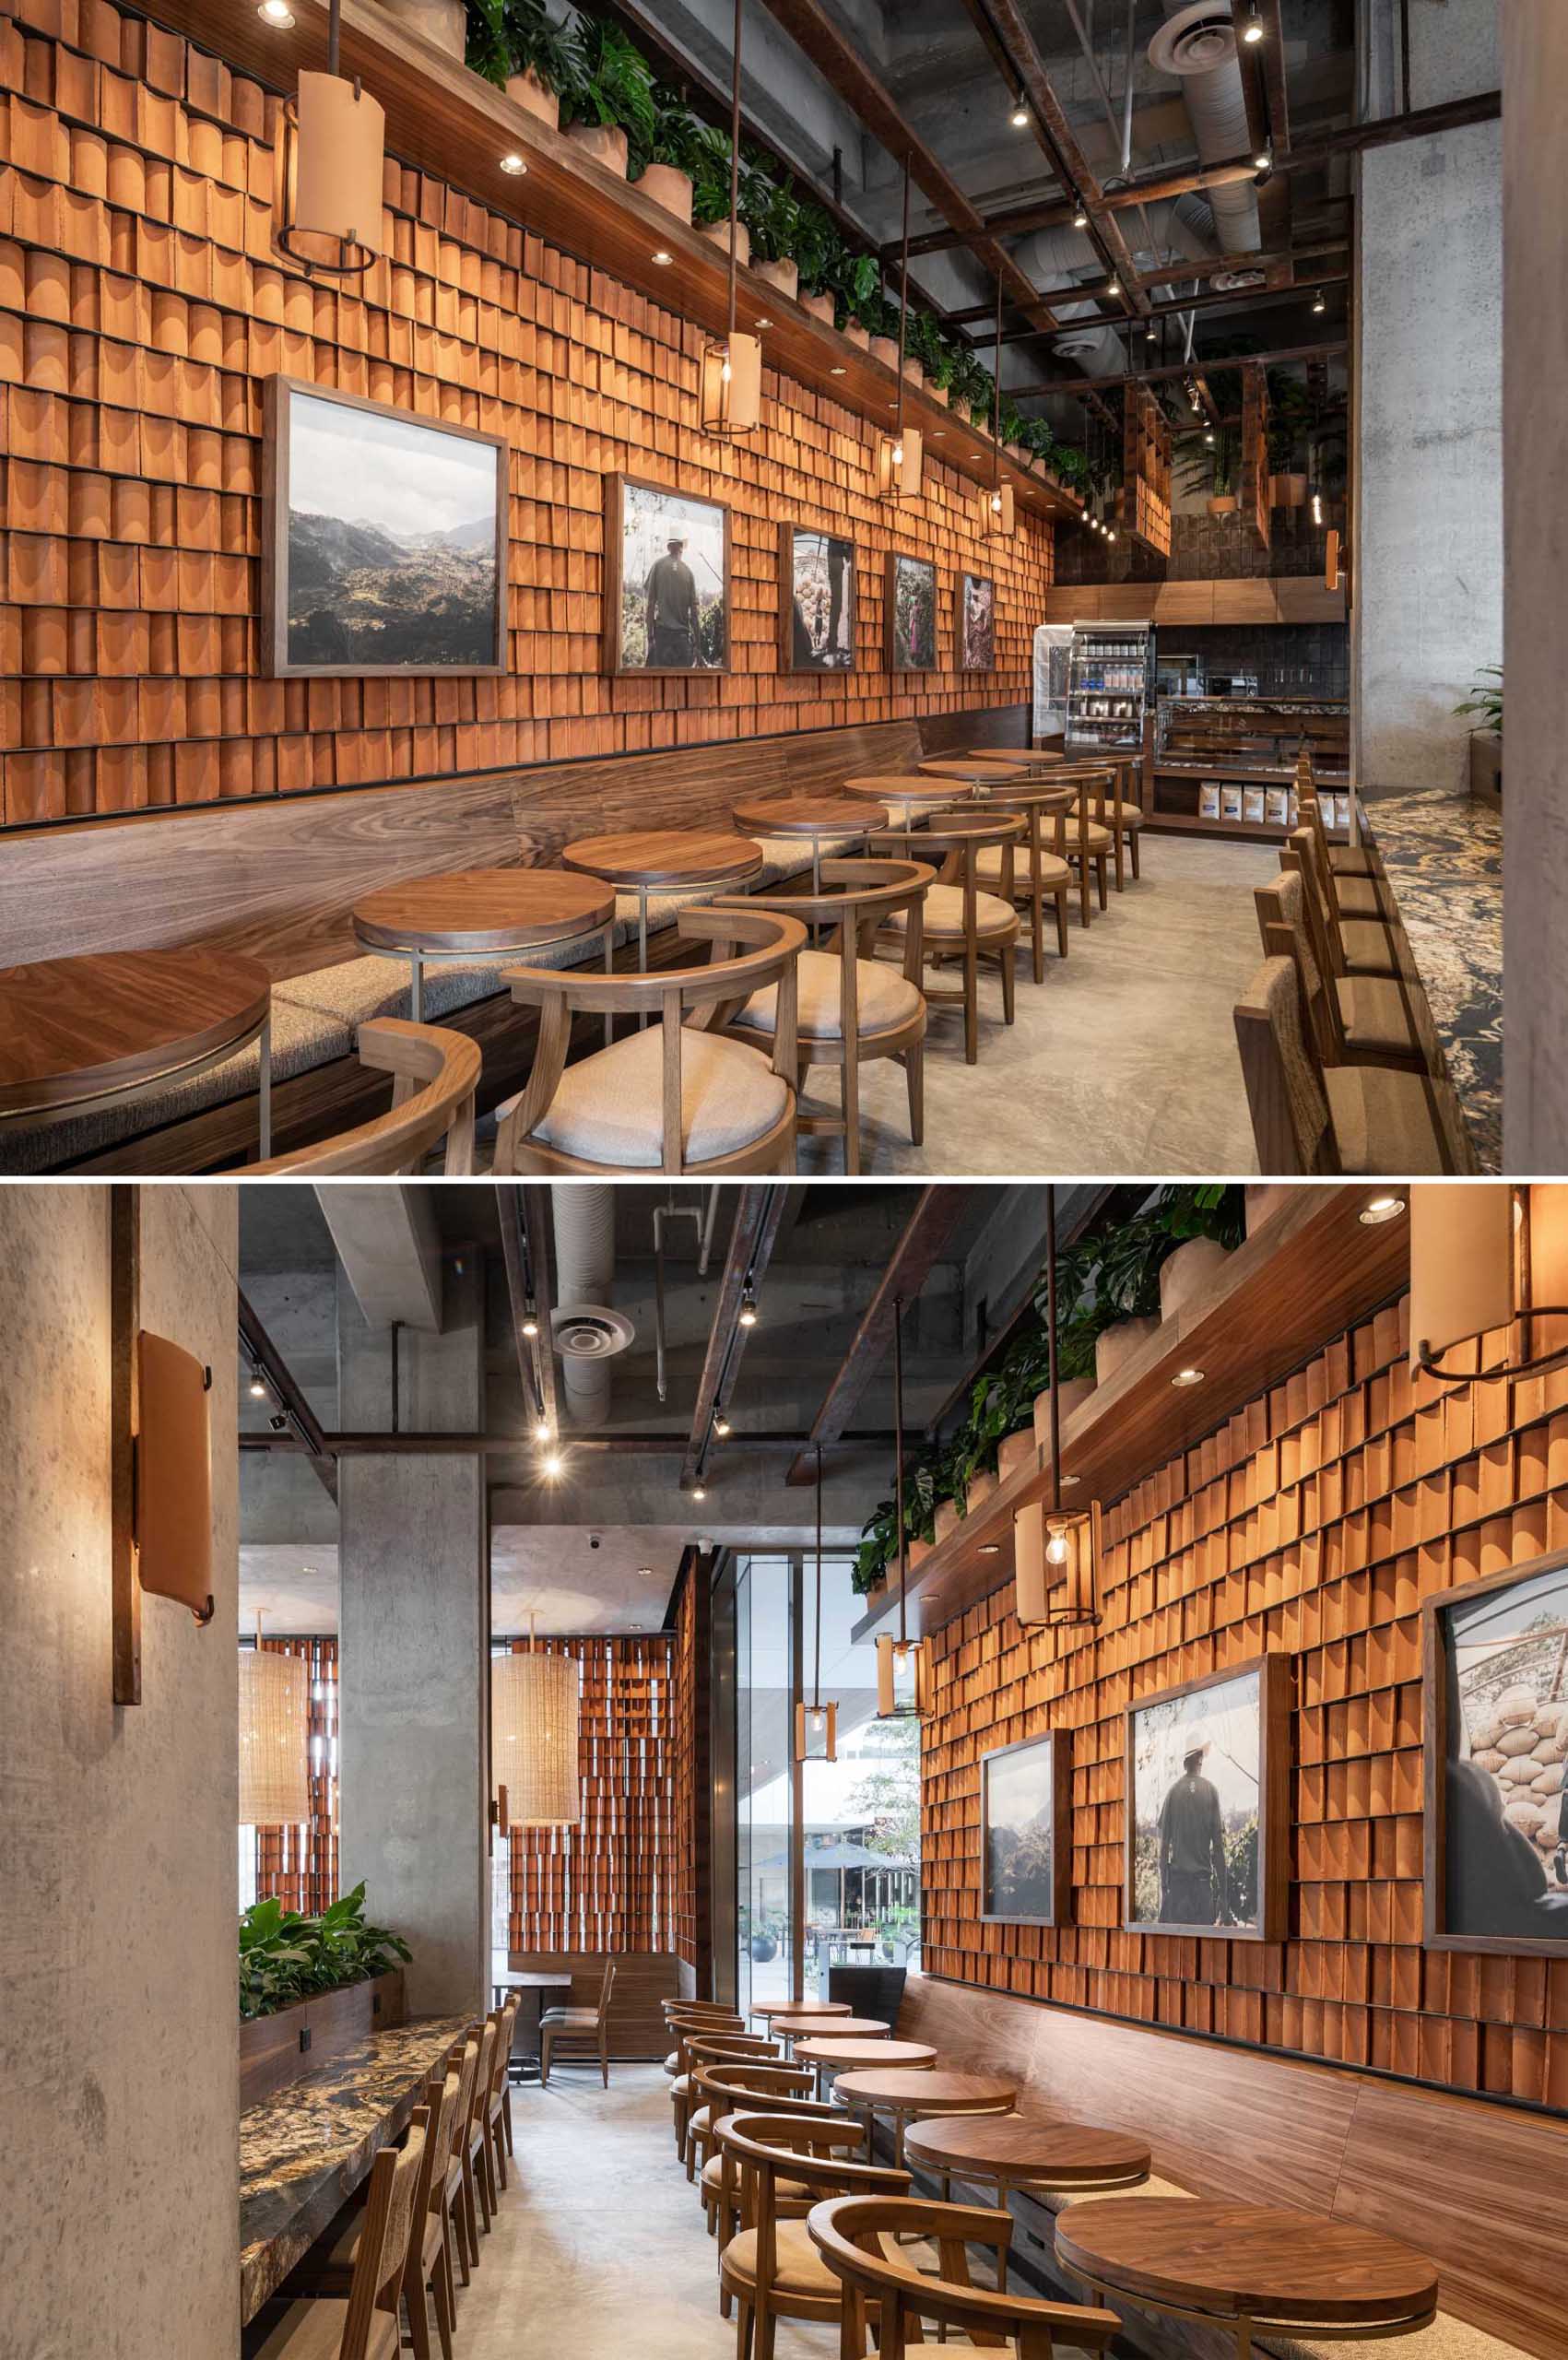 A modern coffee shop interior with plants, clay tiles, wood, and raw concrete.